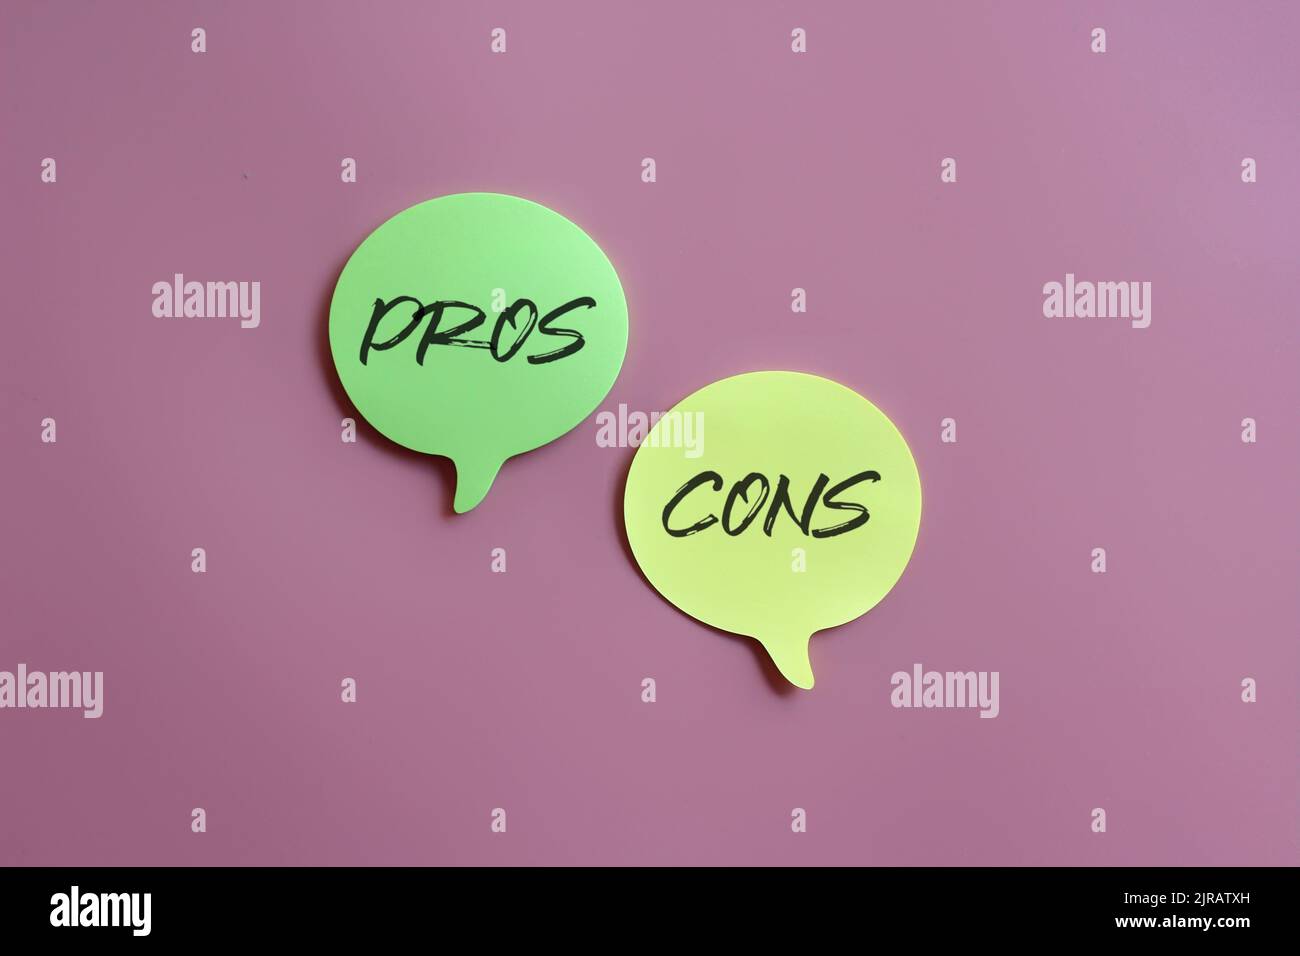 Pros and Cons concept. Speech bubble with text PROS and CONS on pink background Stock Photo